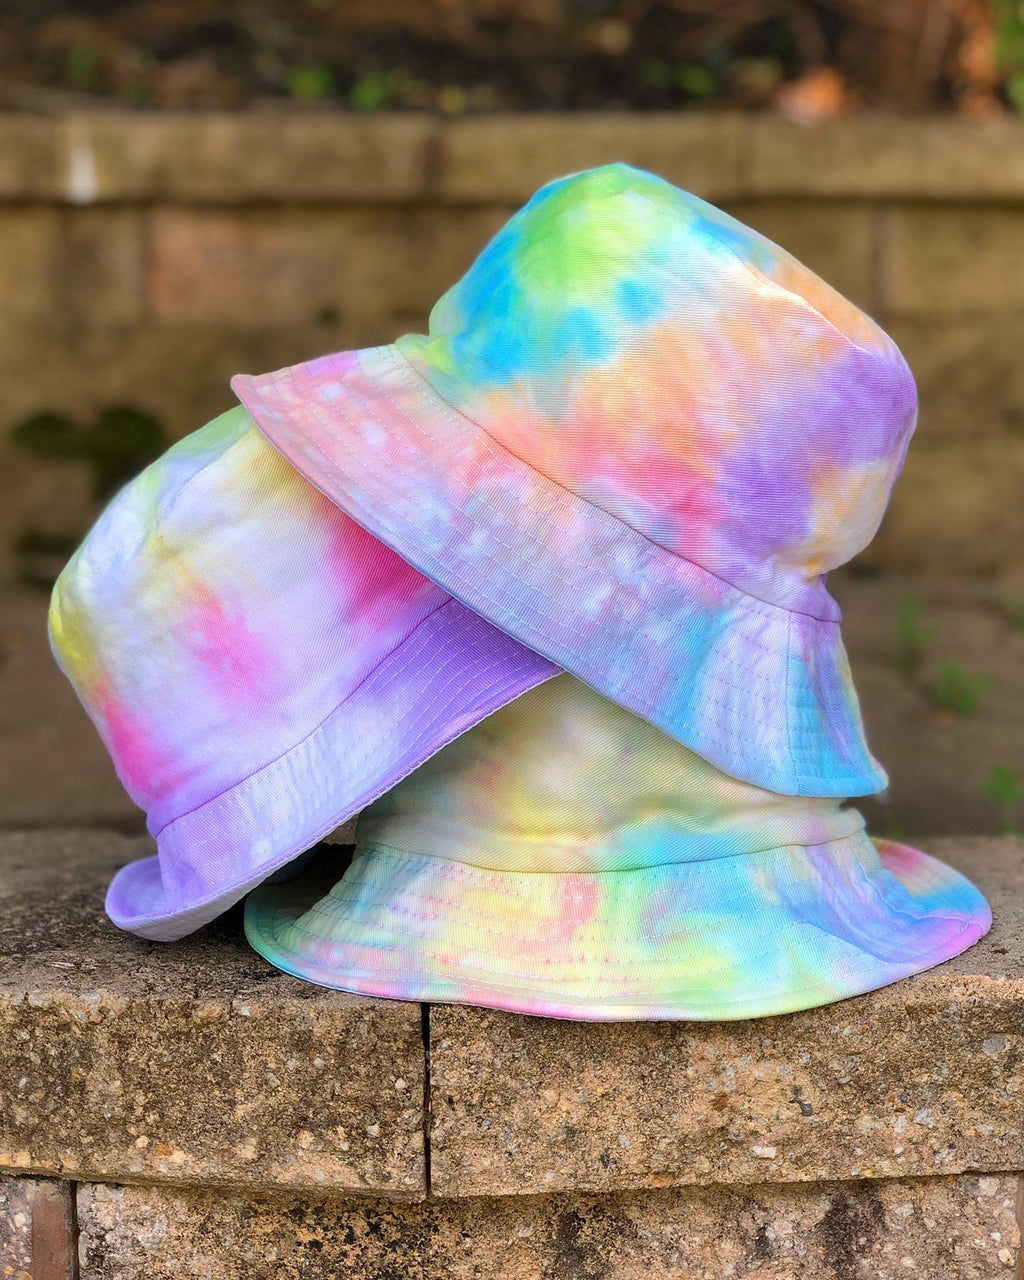 The Beach Company - Shop Cotton Bucket hats and tote bags Online - the beach company harshad daswani